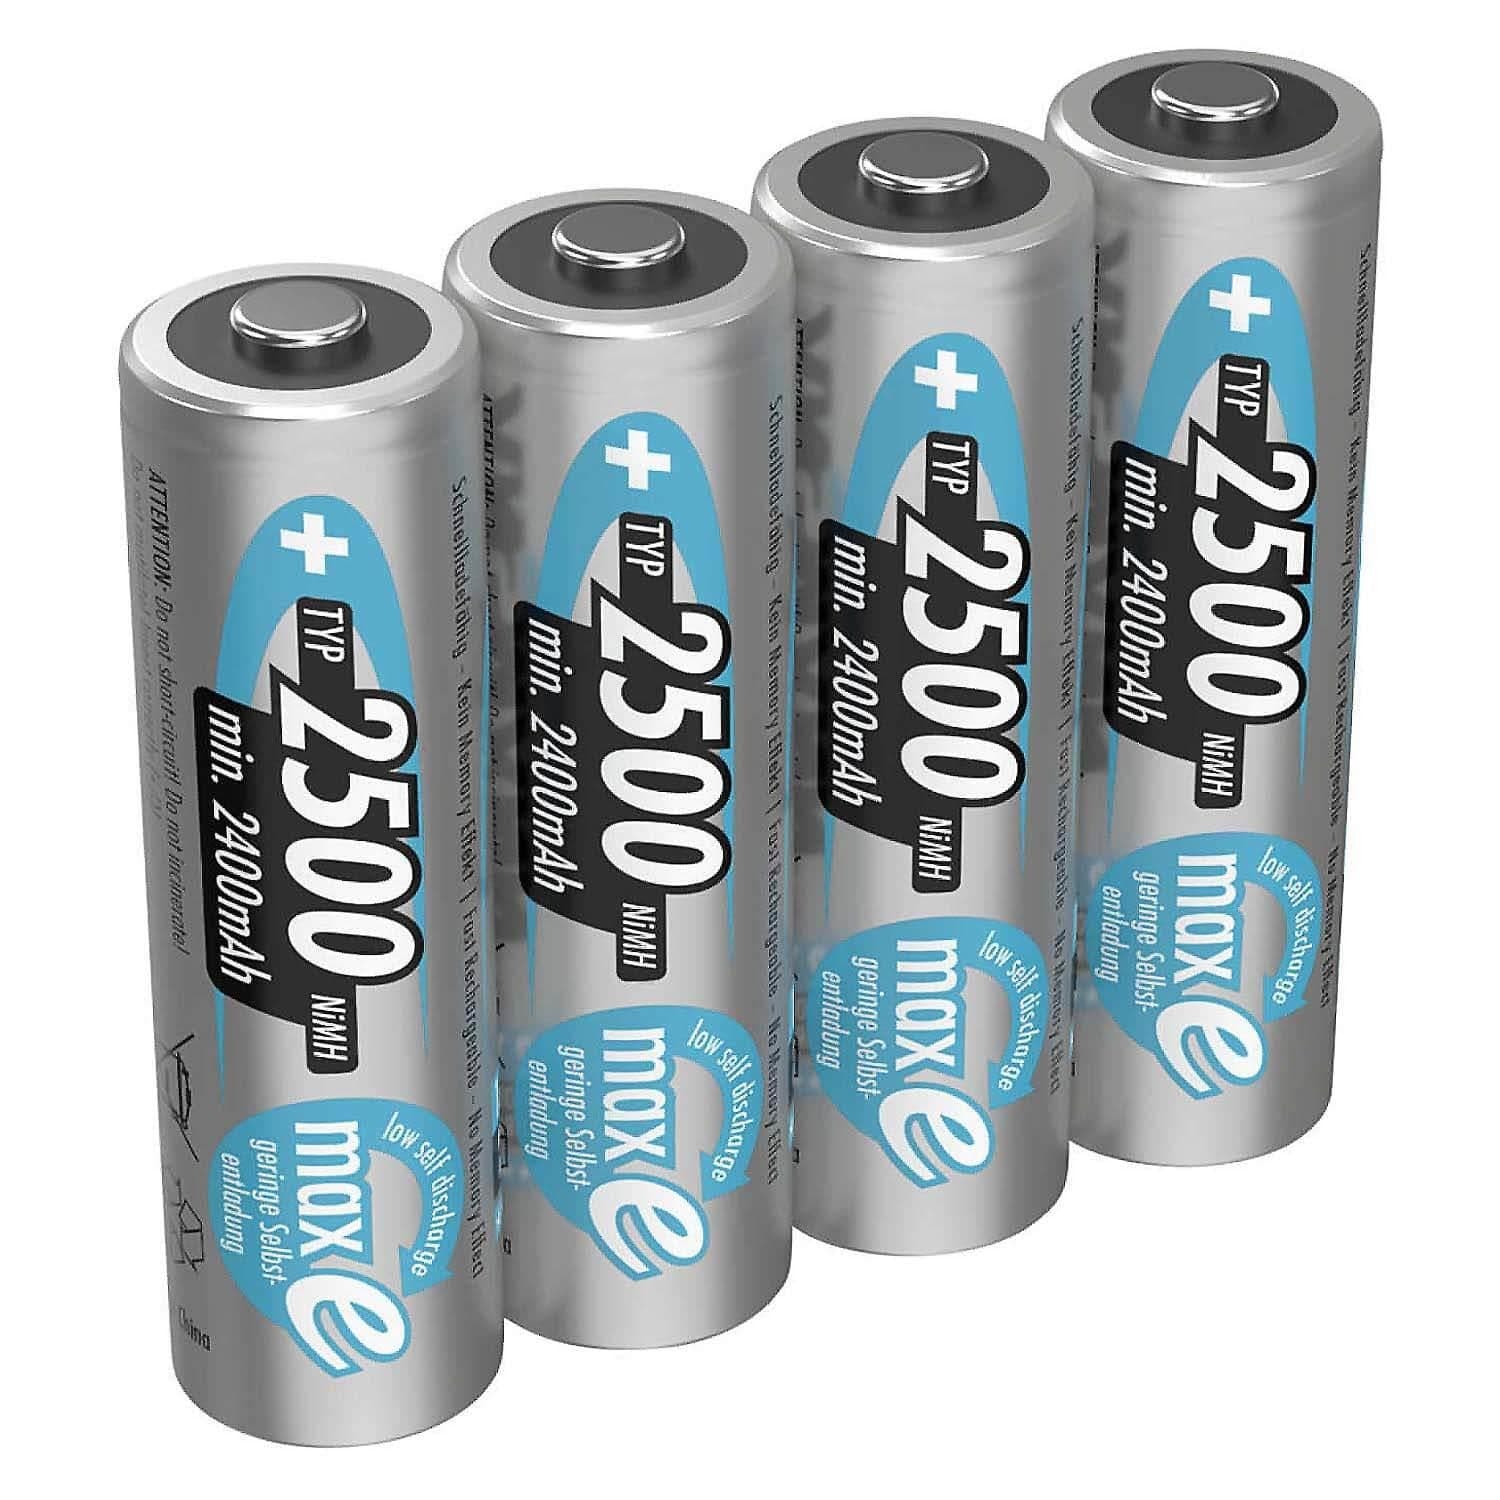 2500mAh NiMH Rechargeable AA Batteries (4-Pack)